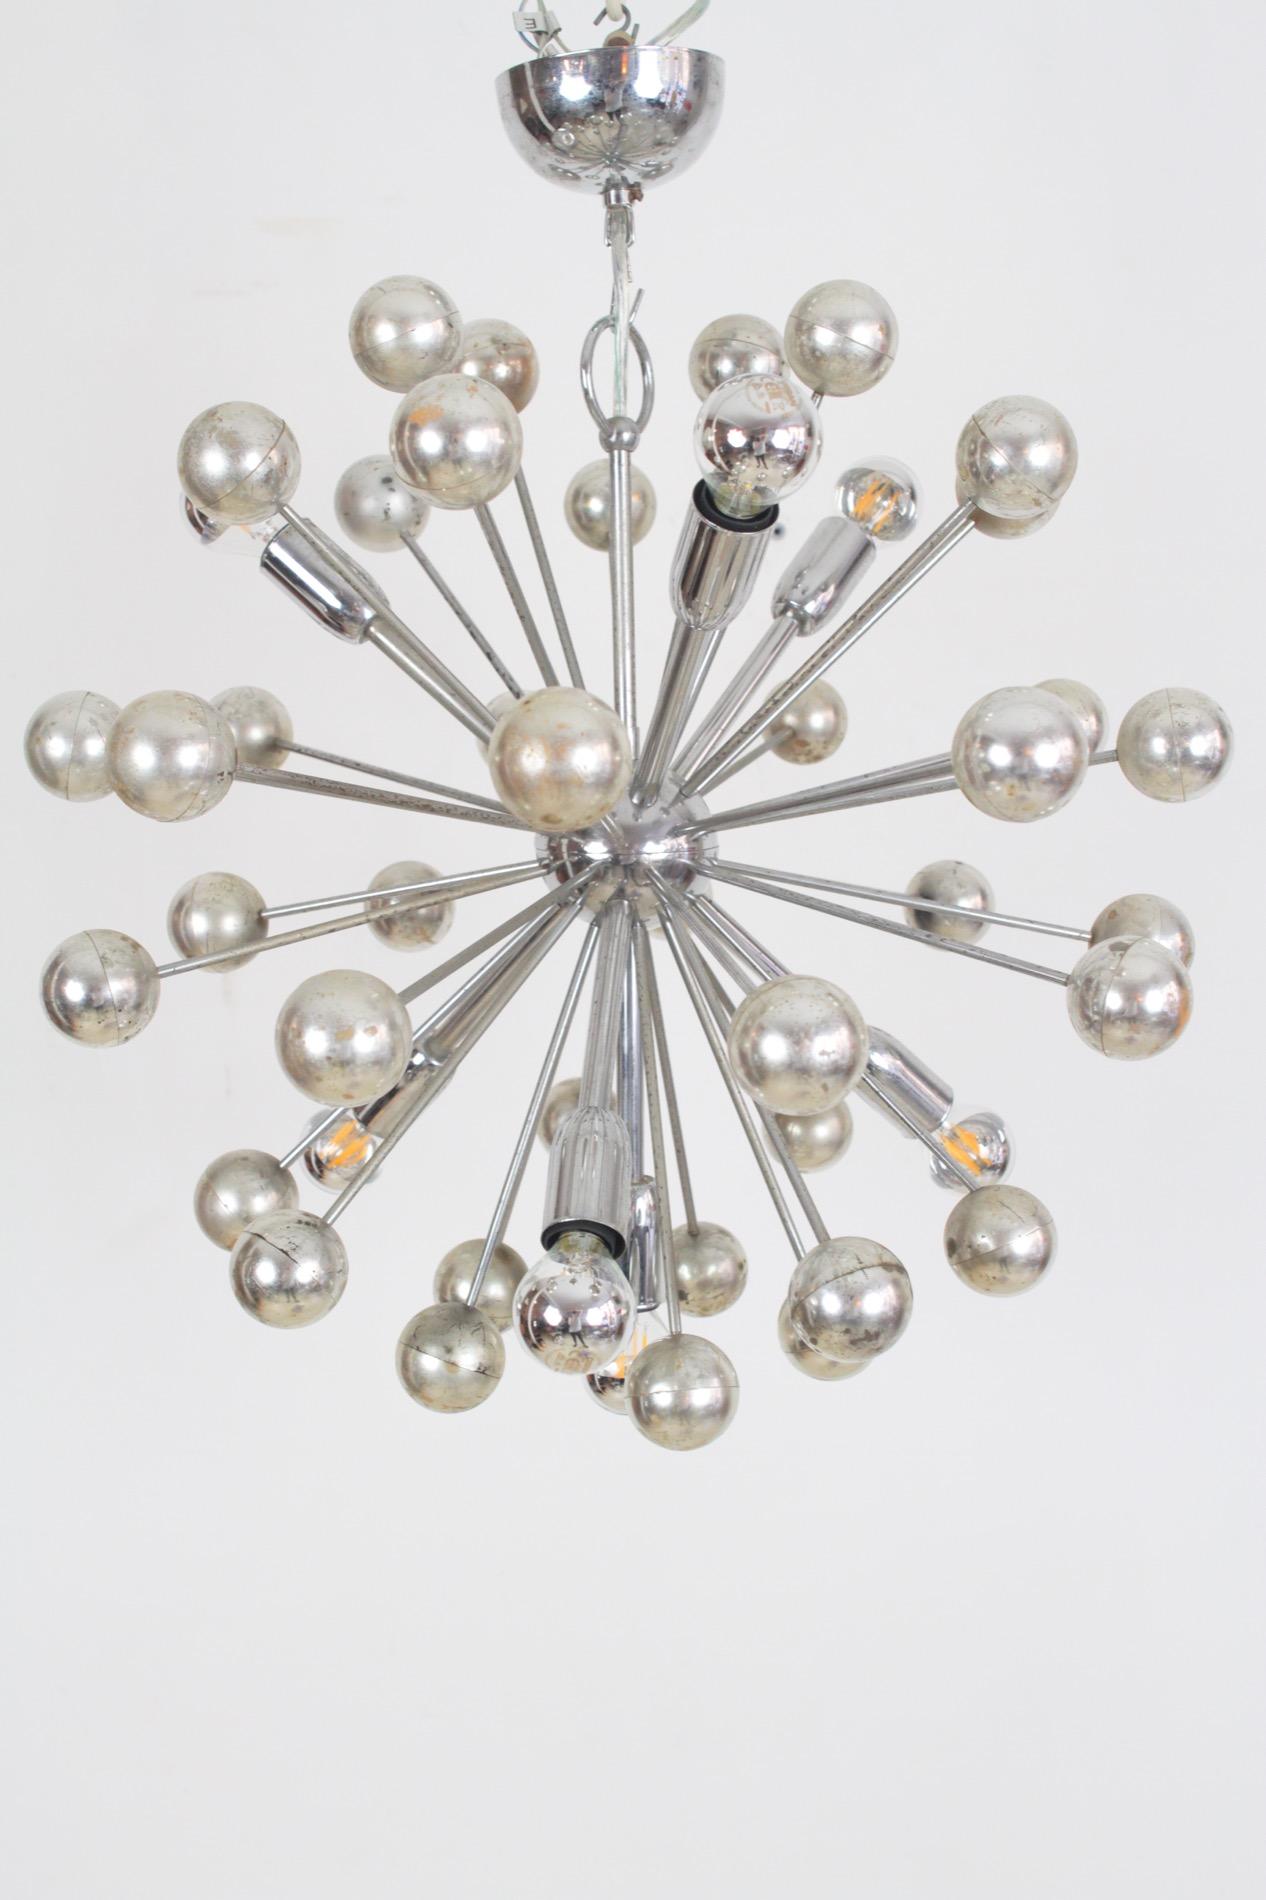 This amazing sputnik chandelier was produced in Italy in the 1970s. It features seven pieces of E14 chromed metal sockets, arms and body interspersed with chrome-plated plastic spheres. Your choice of bulbs will create different looks; we took the